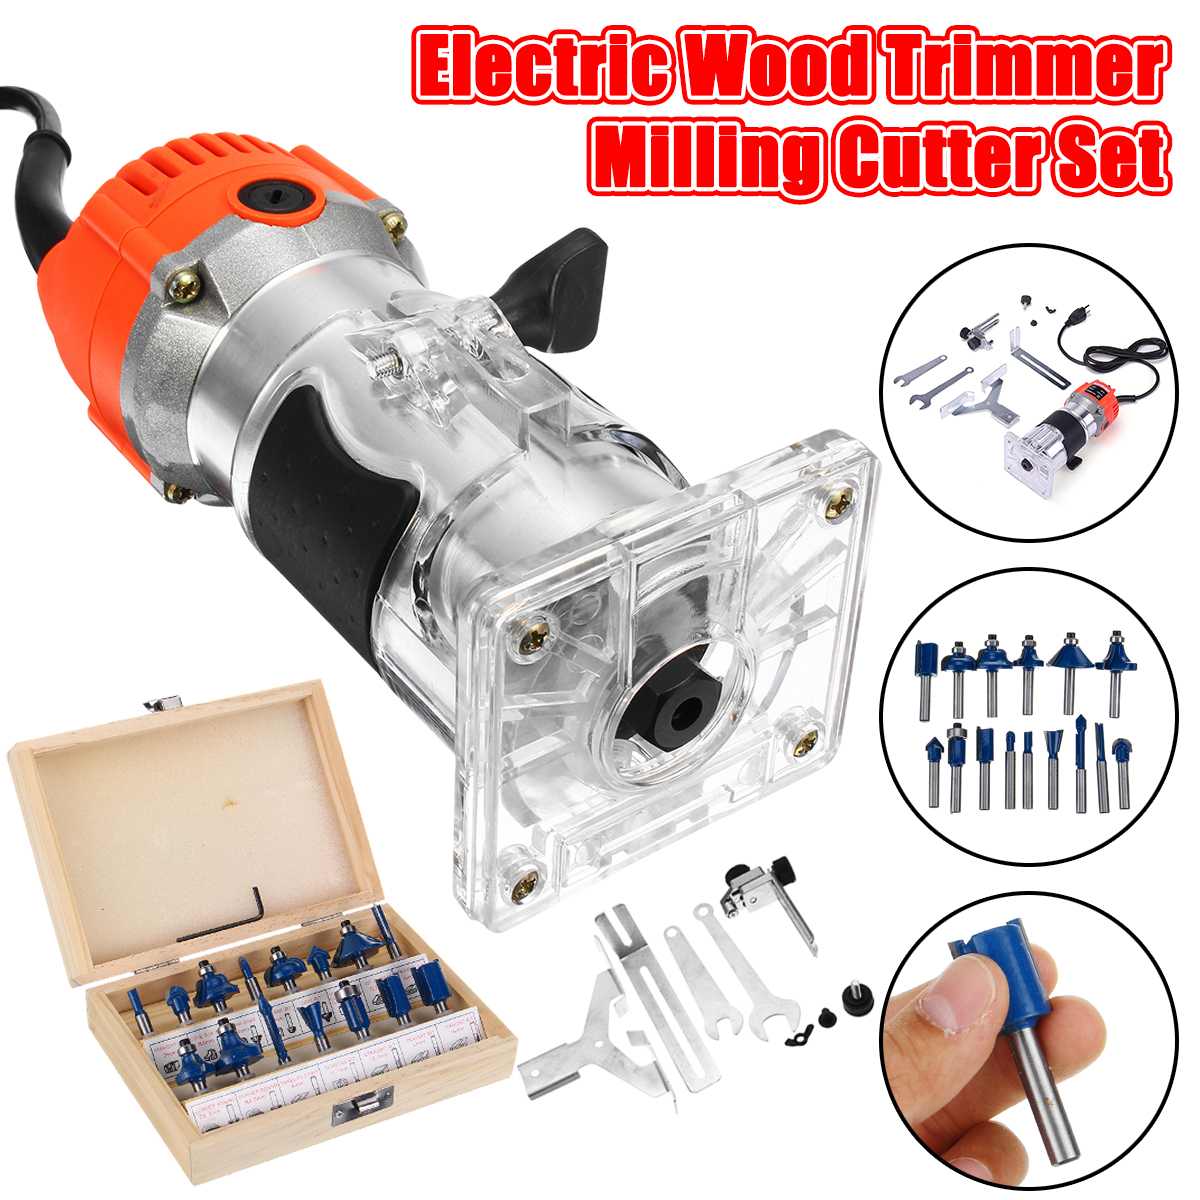 1200W 220V Electric Wood Trimmer Laminator 35000r/min Router Joiners Tool Set Aluminum+15pcs 6.35mm Collet Diameter Wood Router